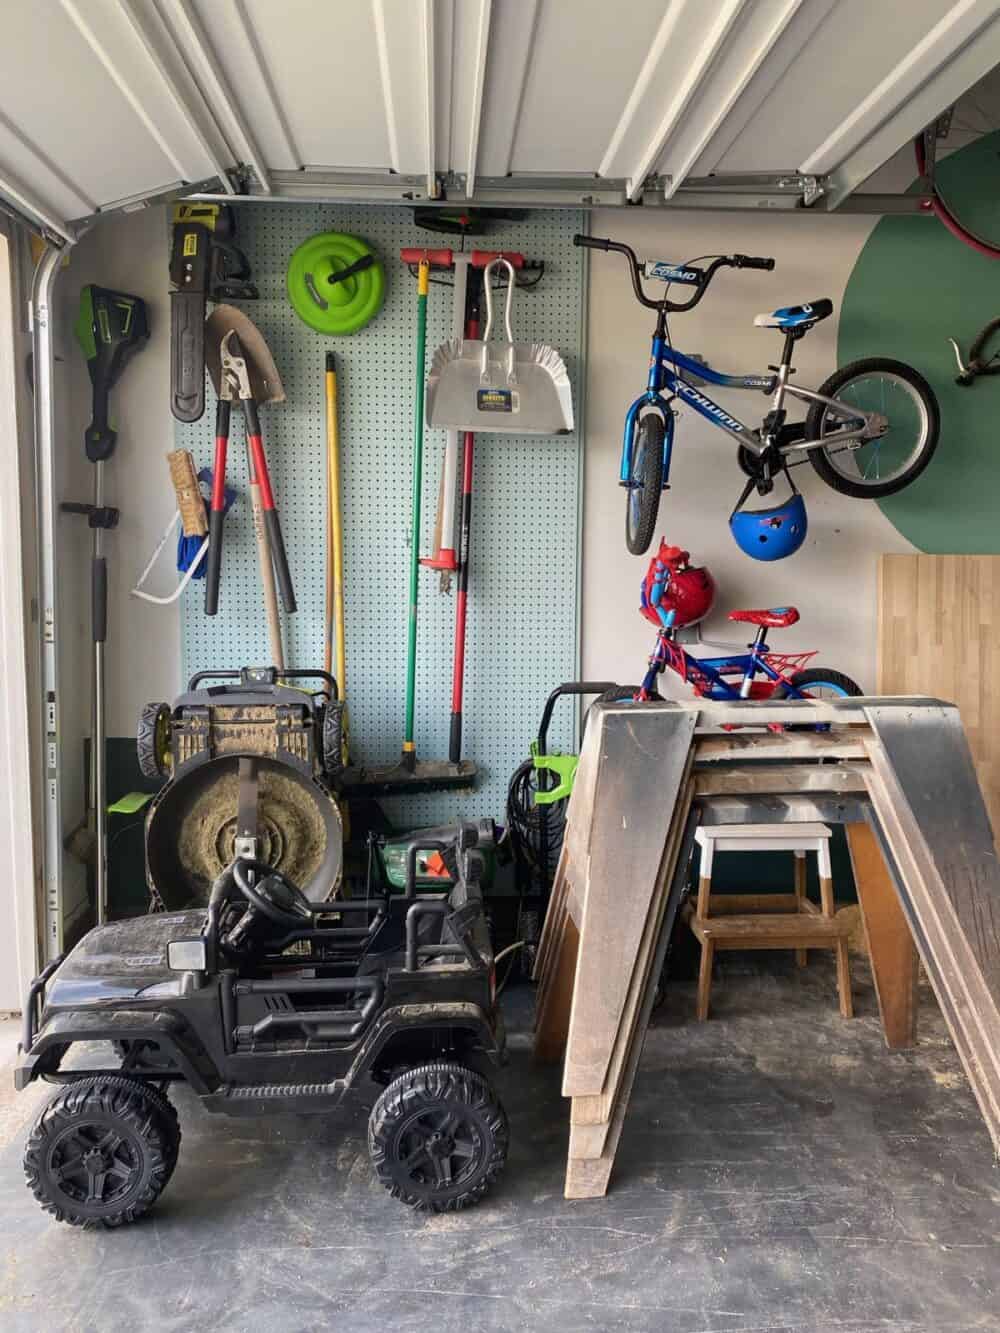 Large pegboard with lawn equipment hung on it